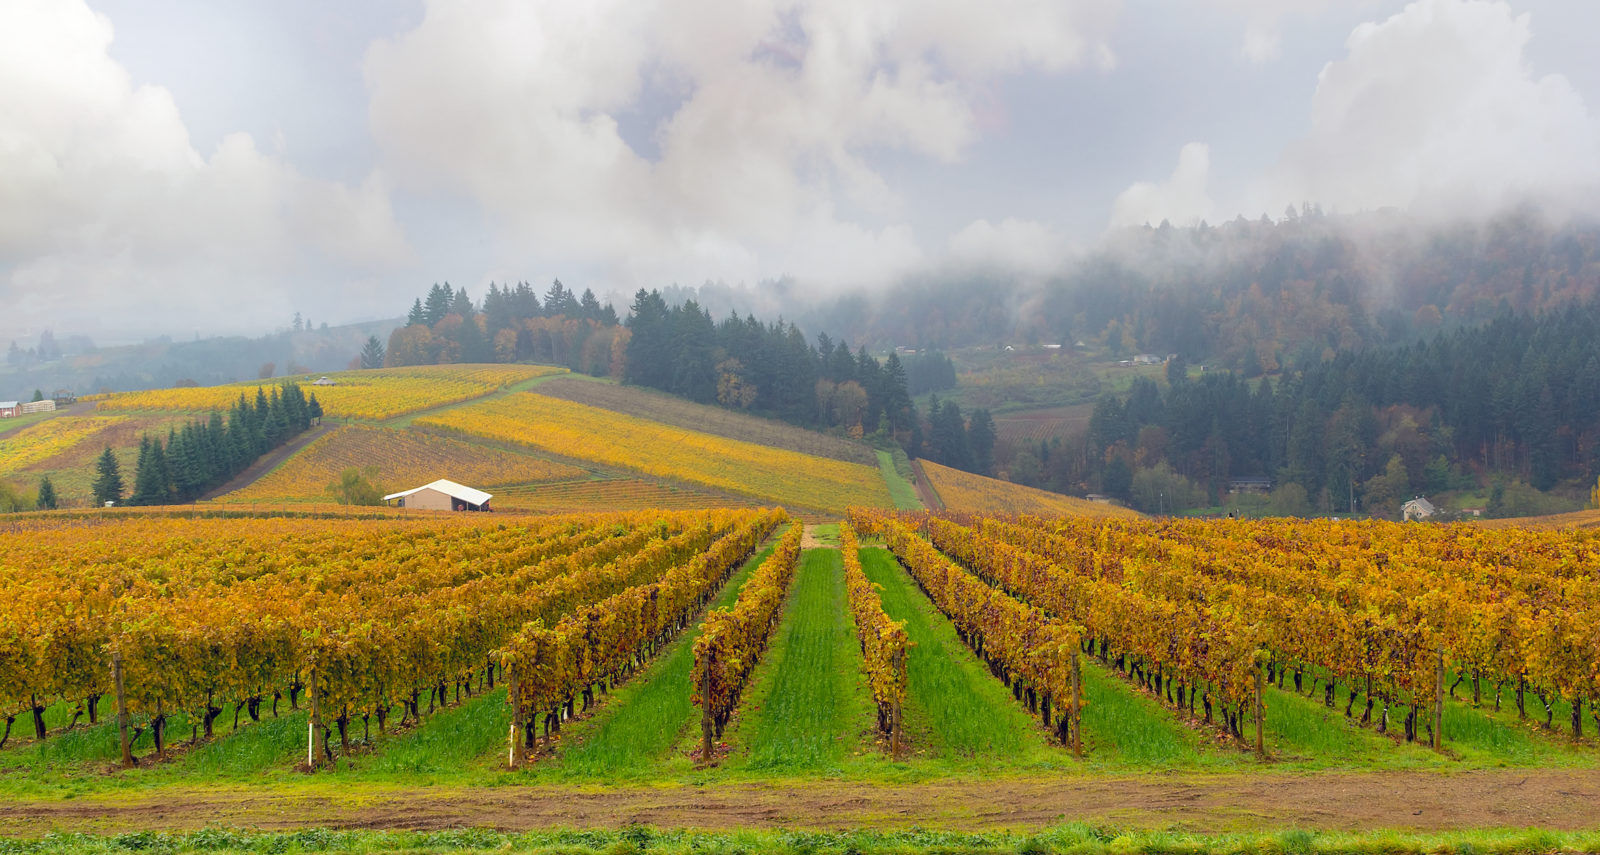 Pacific Pinot Noirs and Chardonnays: The Best Oregon Wines